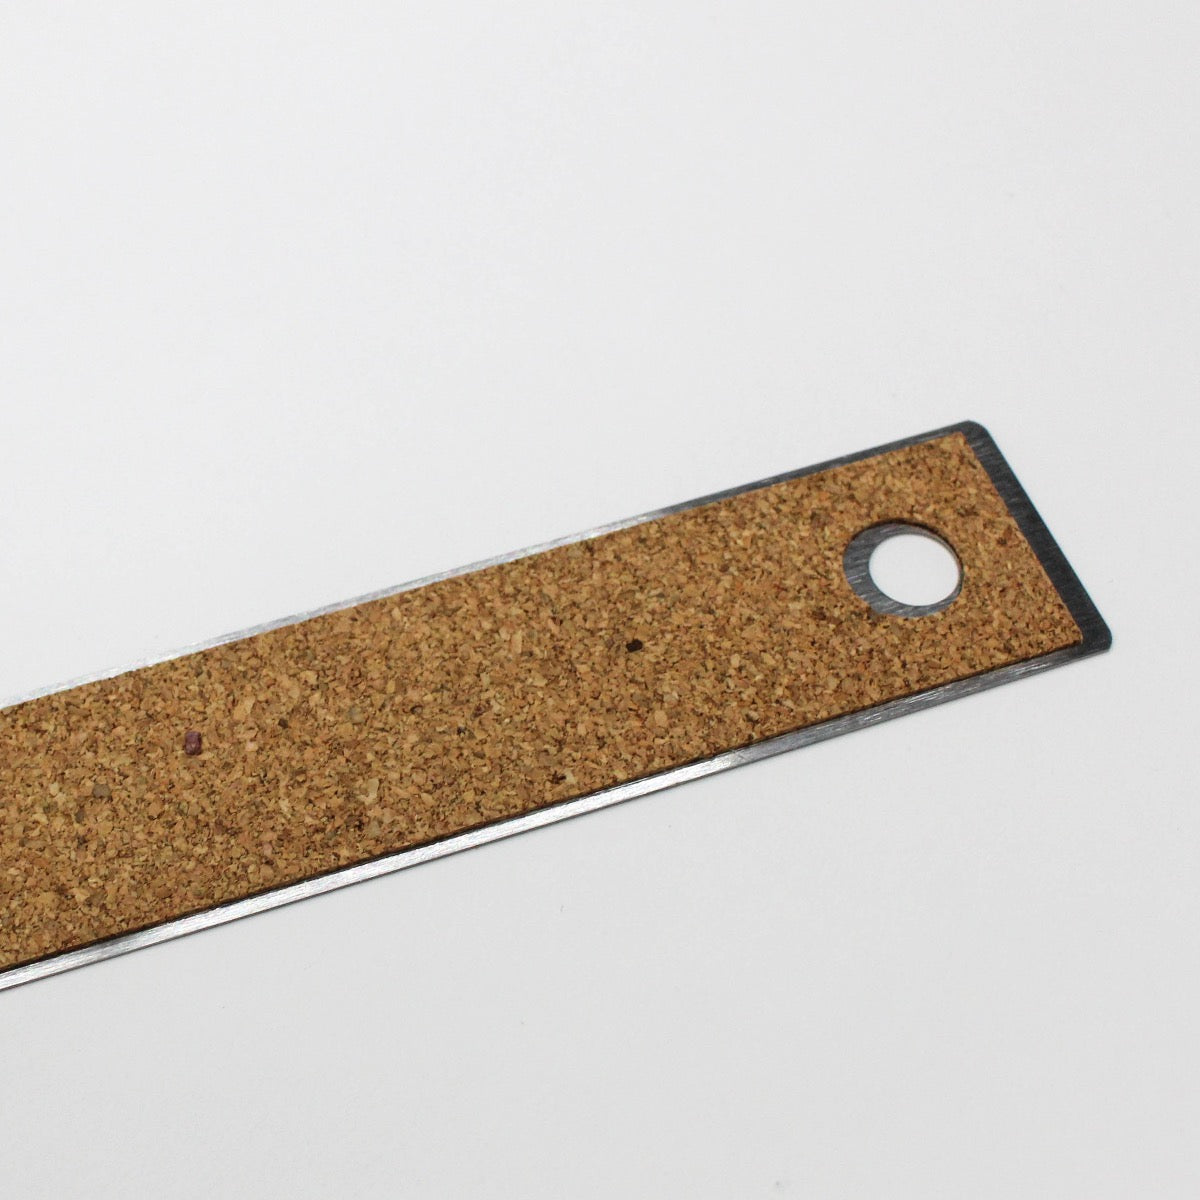 Stainless Steel Yard Stick with Cork backing